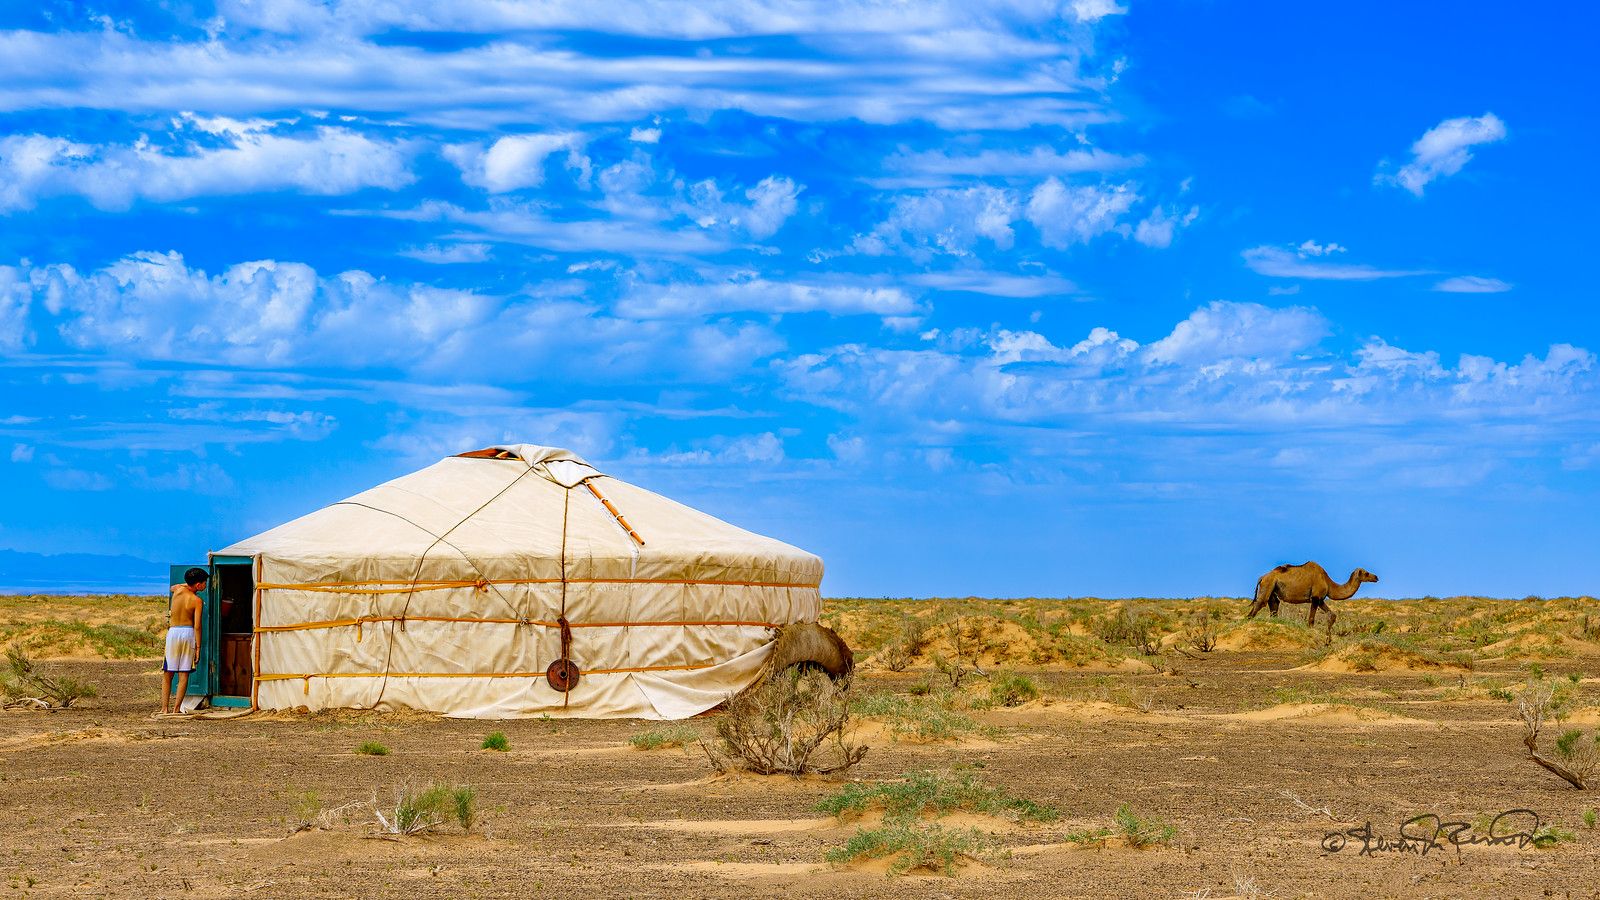 Spend the night in the Gobi Desert while on a motorcycle tour of Mongolia